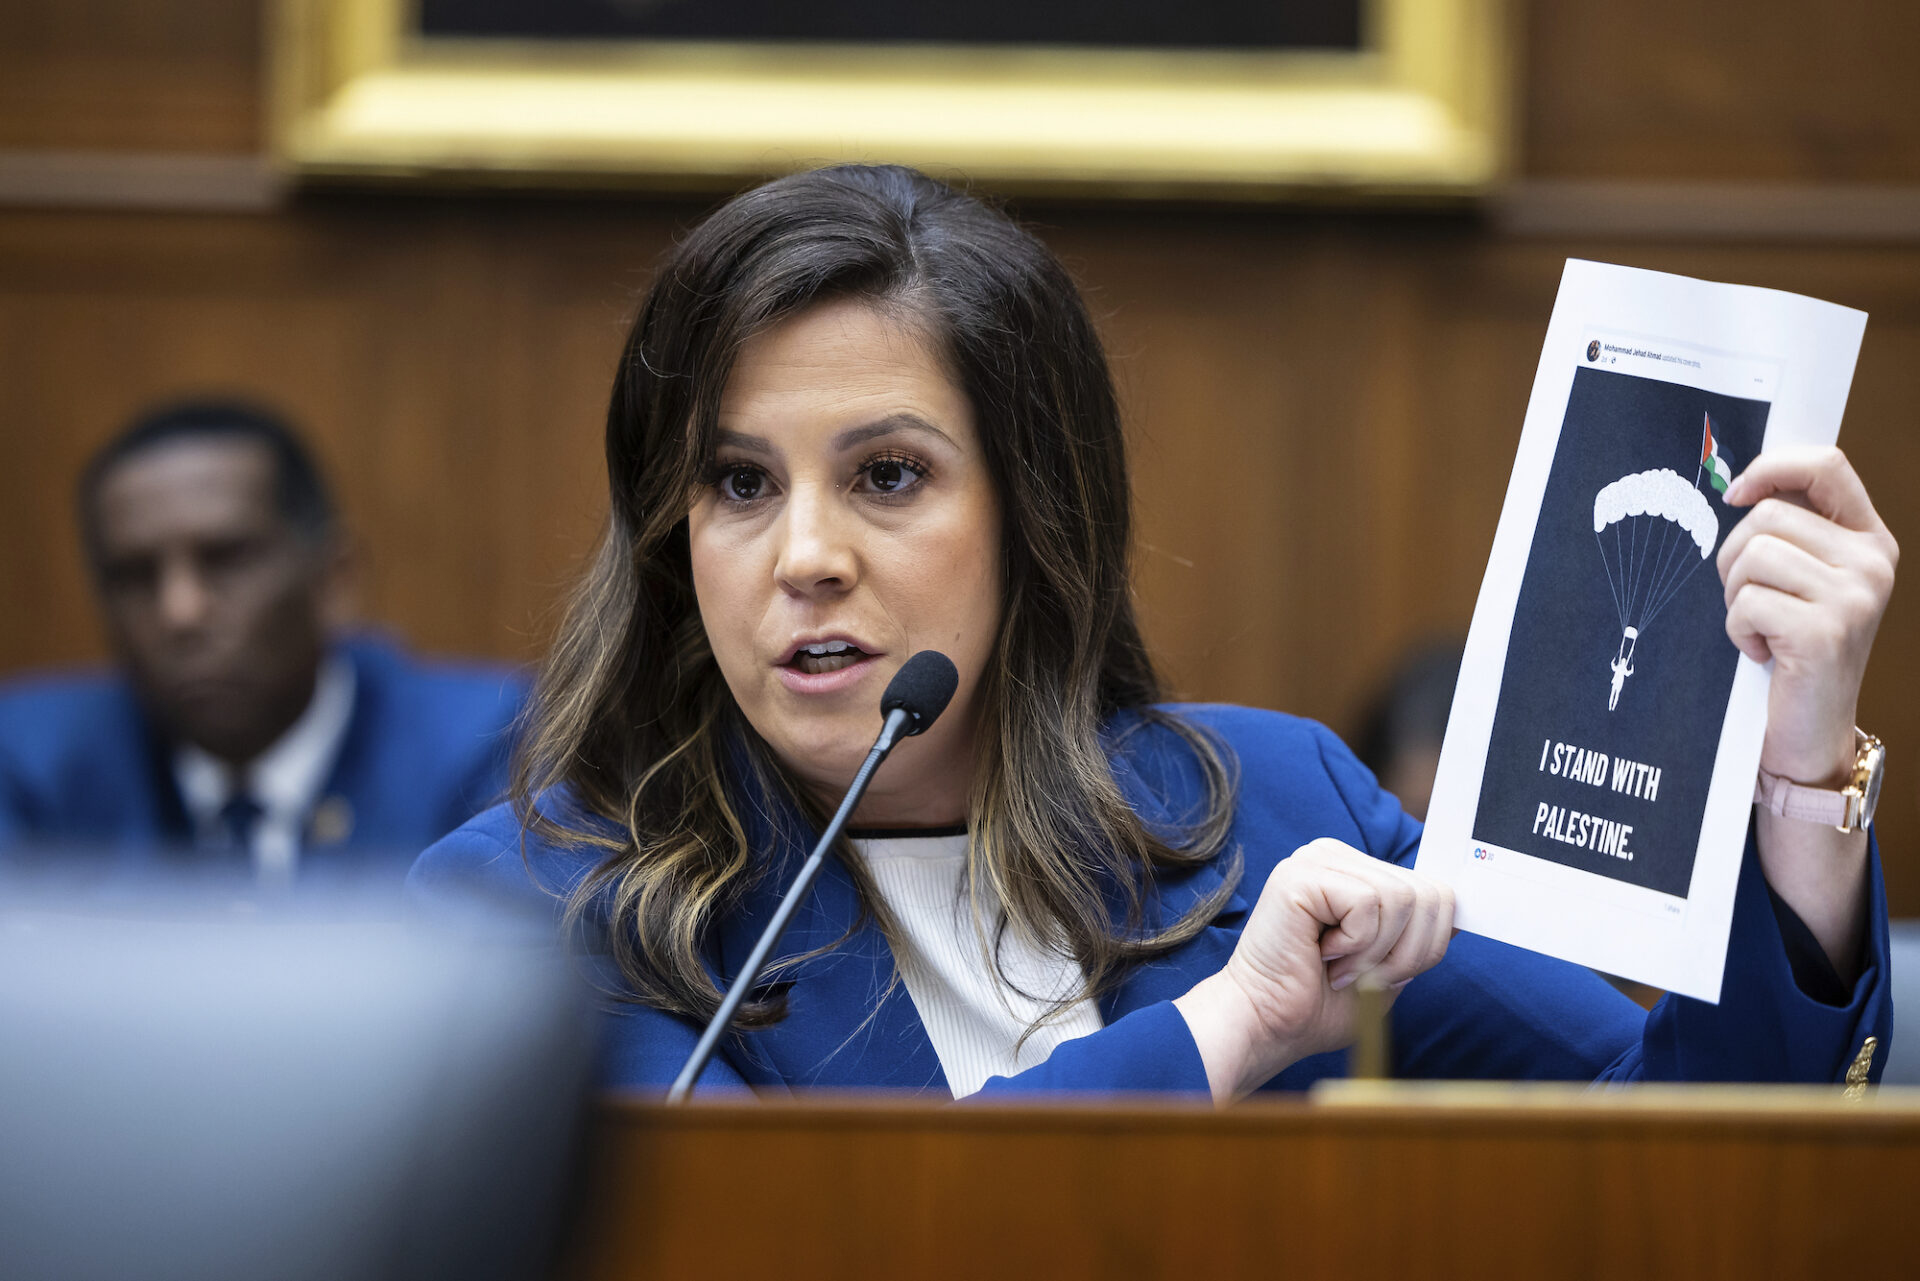 Rep. Elise Stefanik (R-NY) questions witnesses during a House Education and Workforce subcommittee hearing on antisemitism in K-12 education on Capitol Hill on Wednesday.